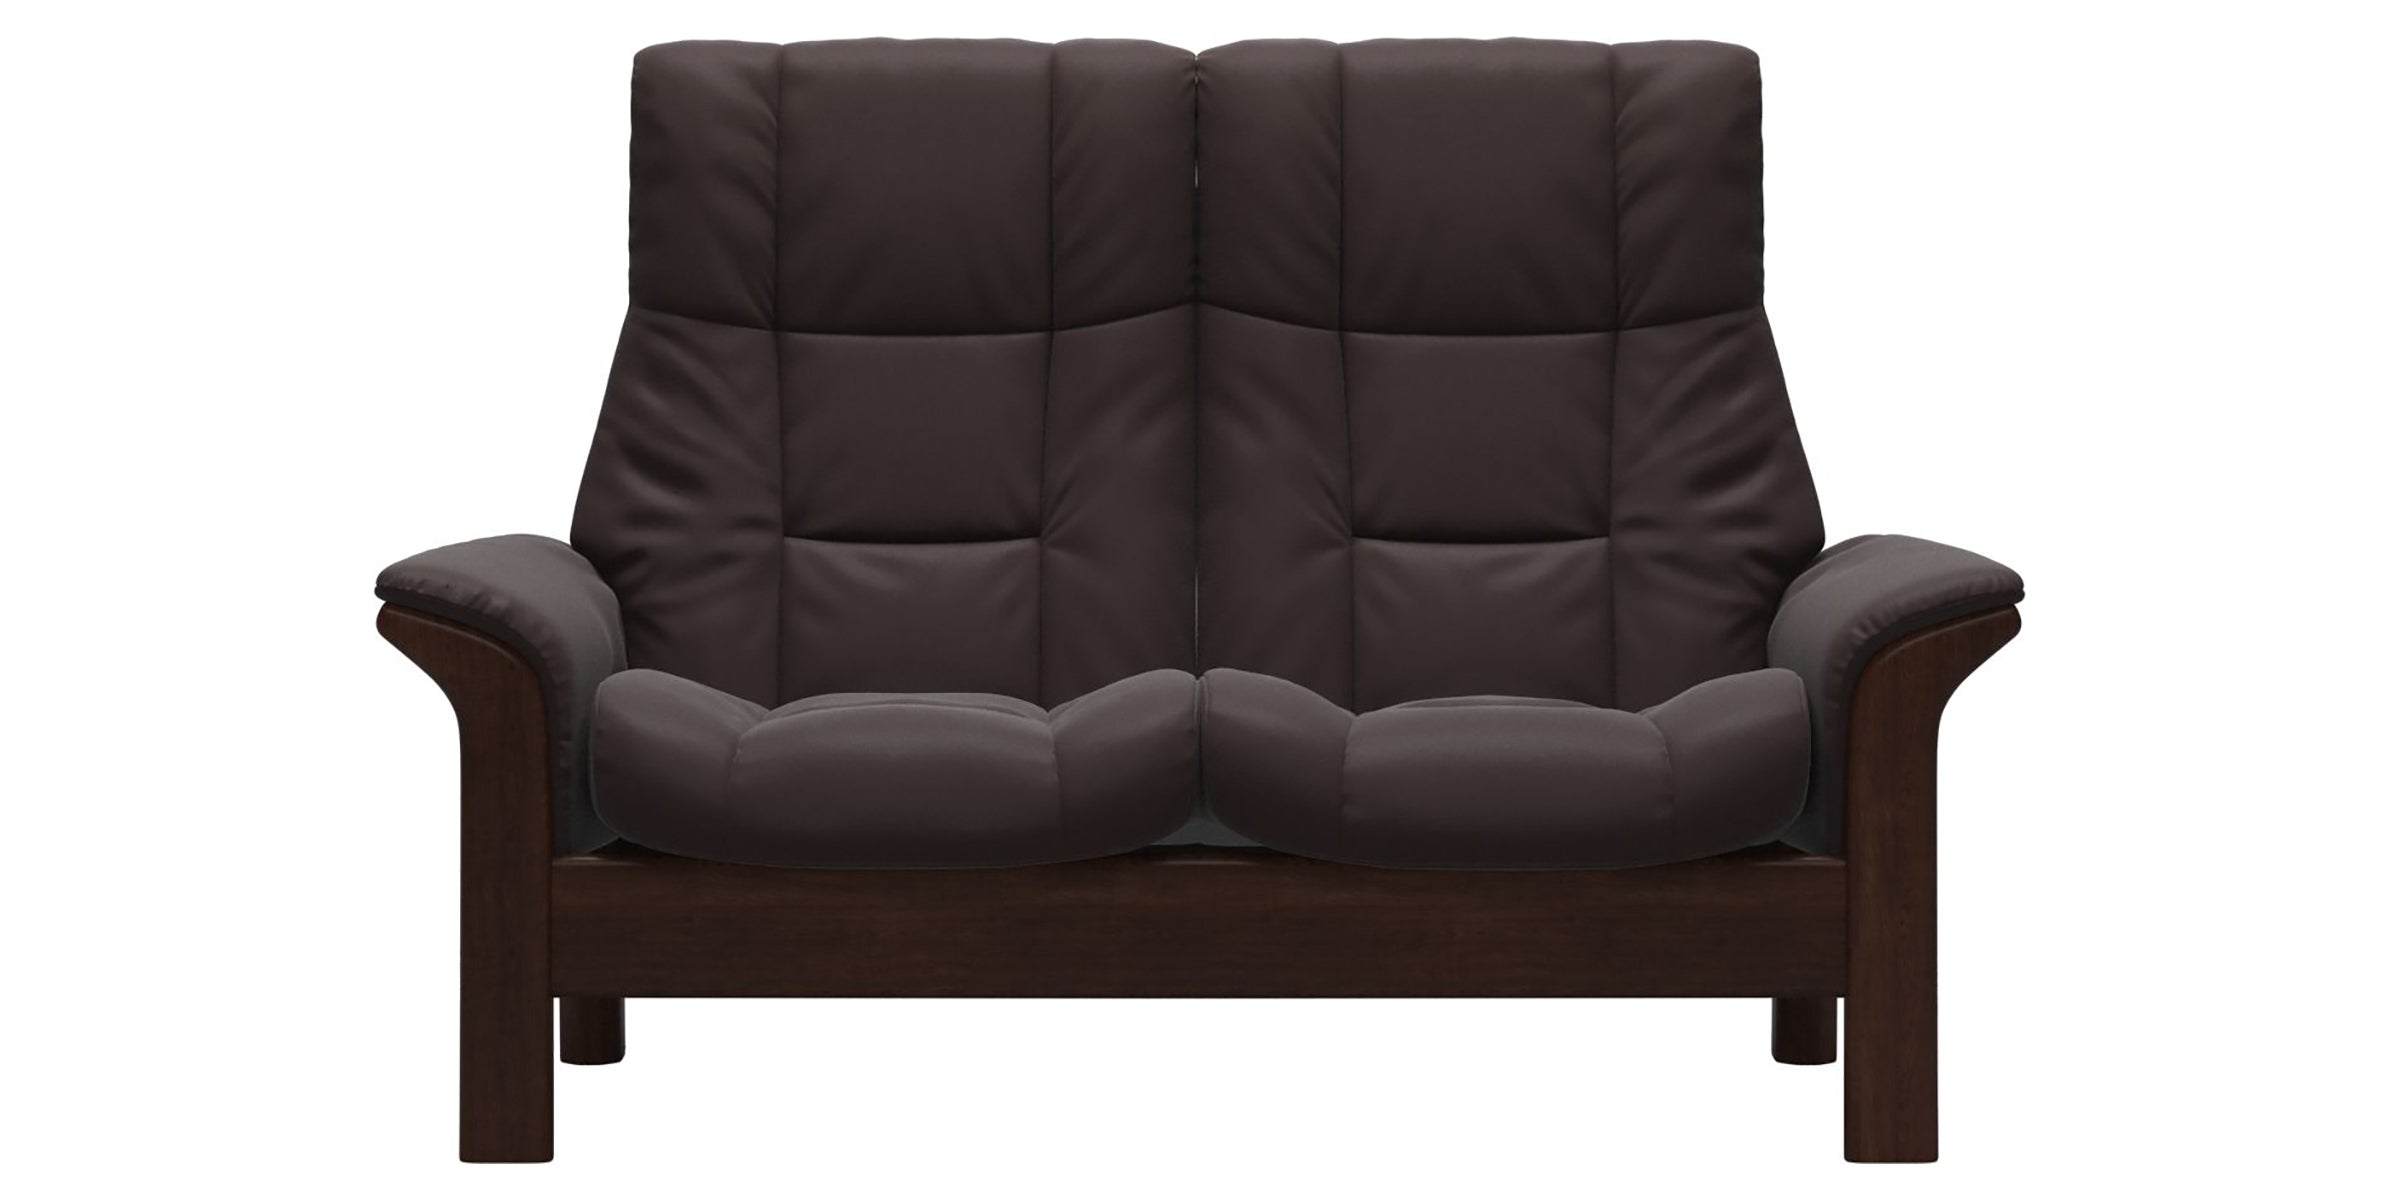 Paloma Leather Chocolate and Brown Base | Stressless Windsor 2-Seater High Back Sofa | Valley Ridge Furniture